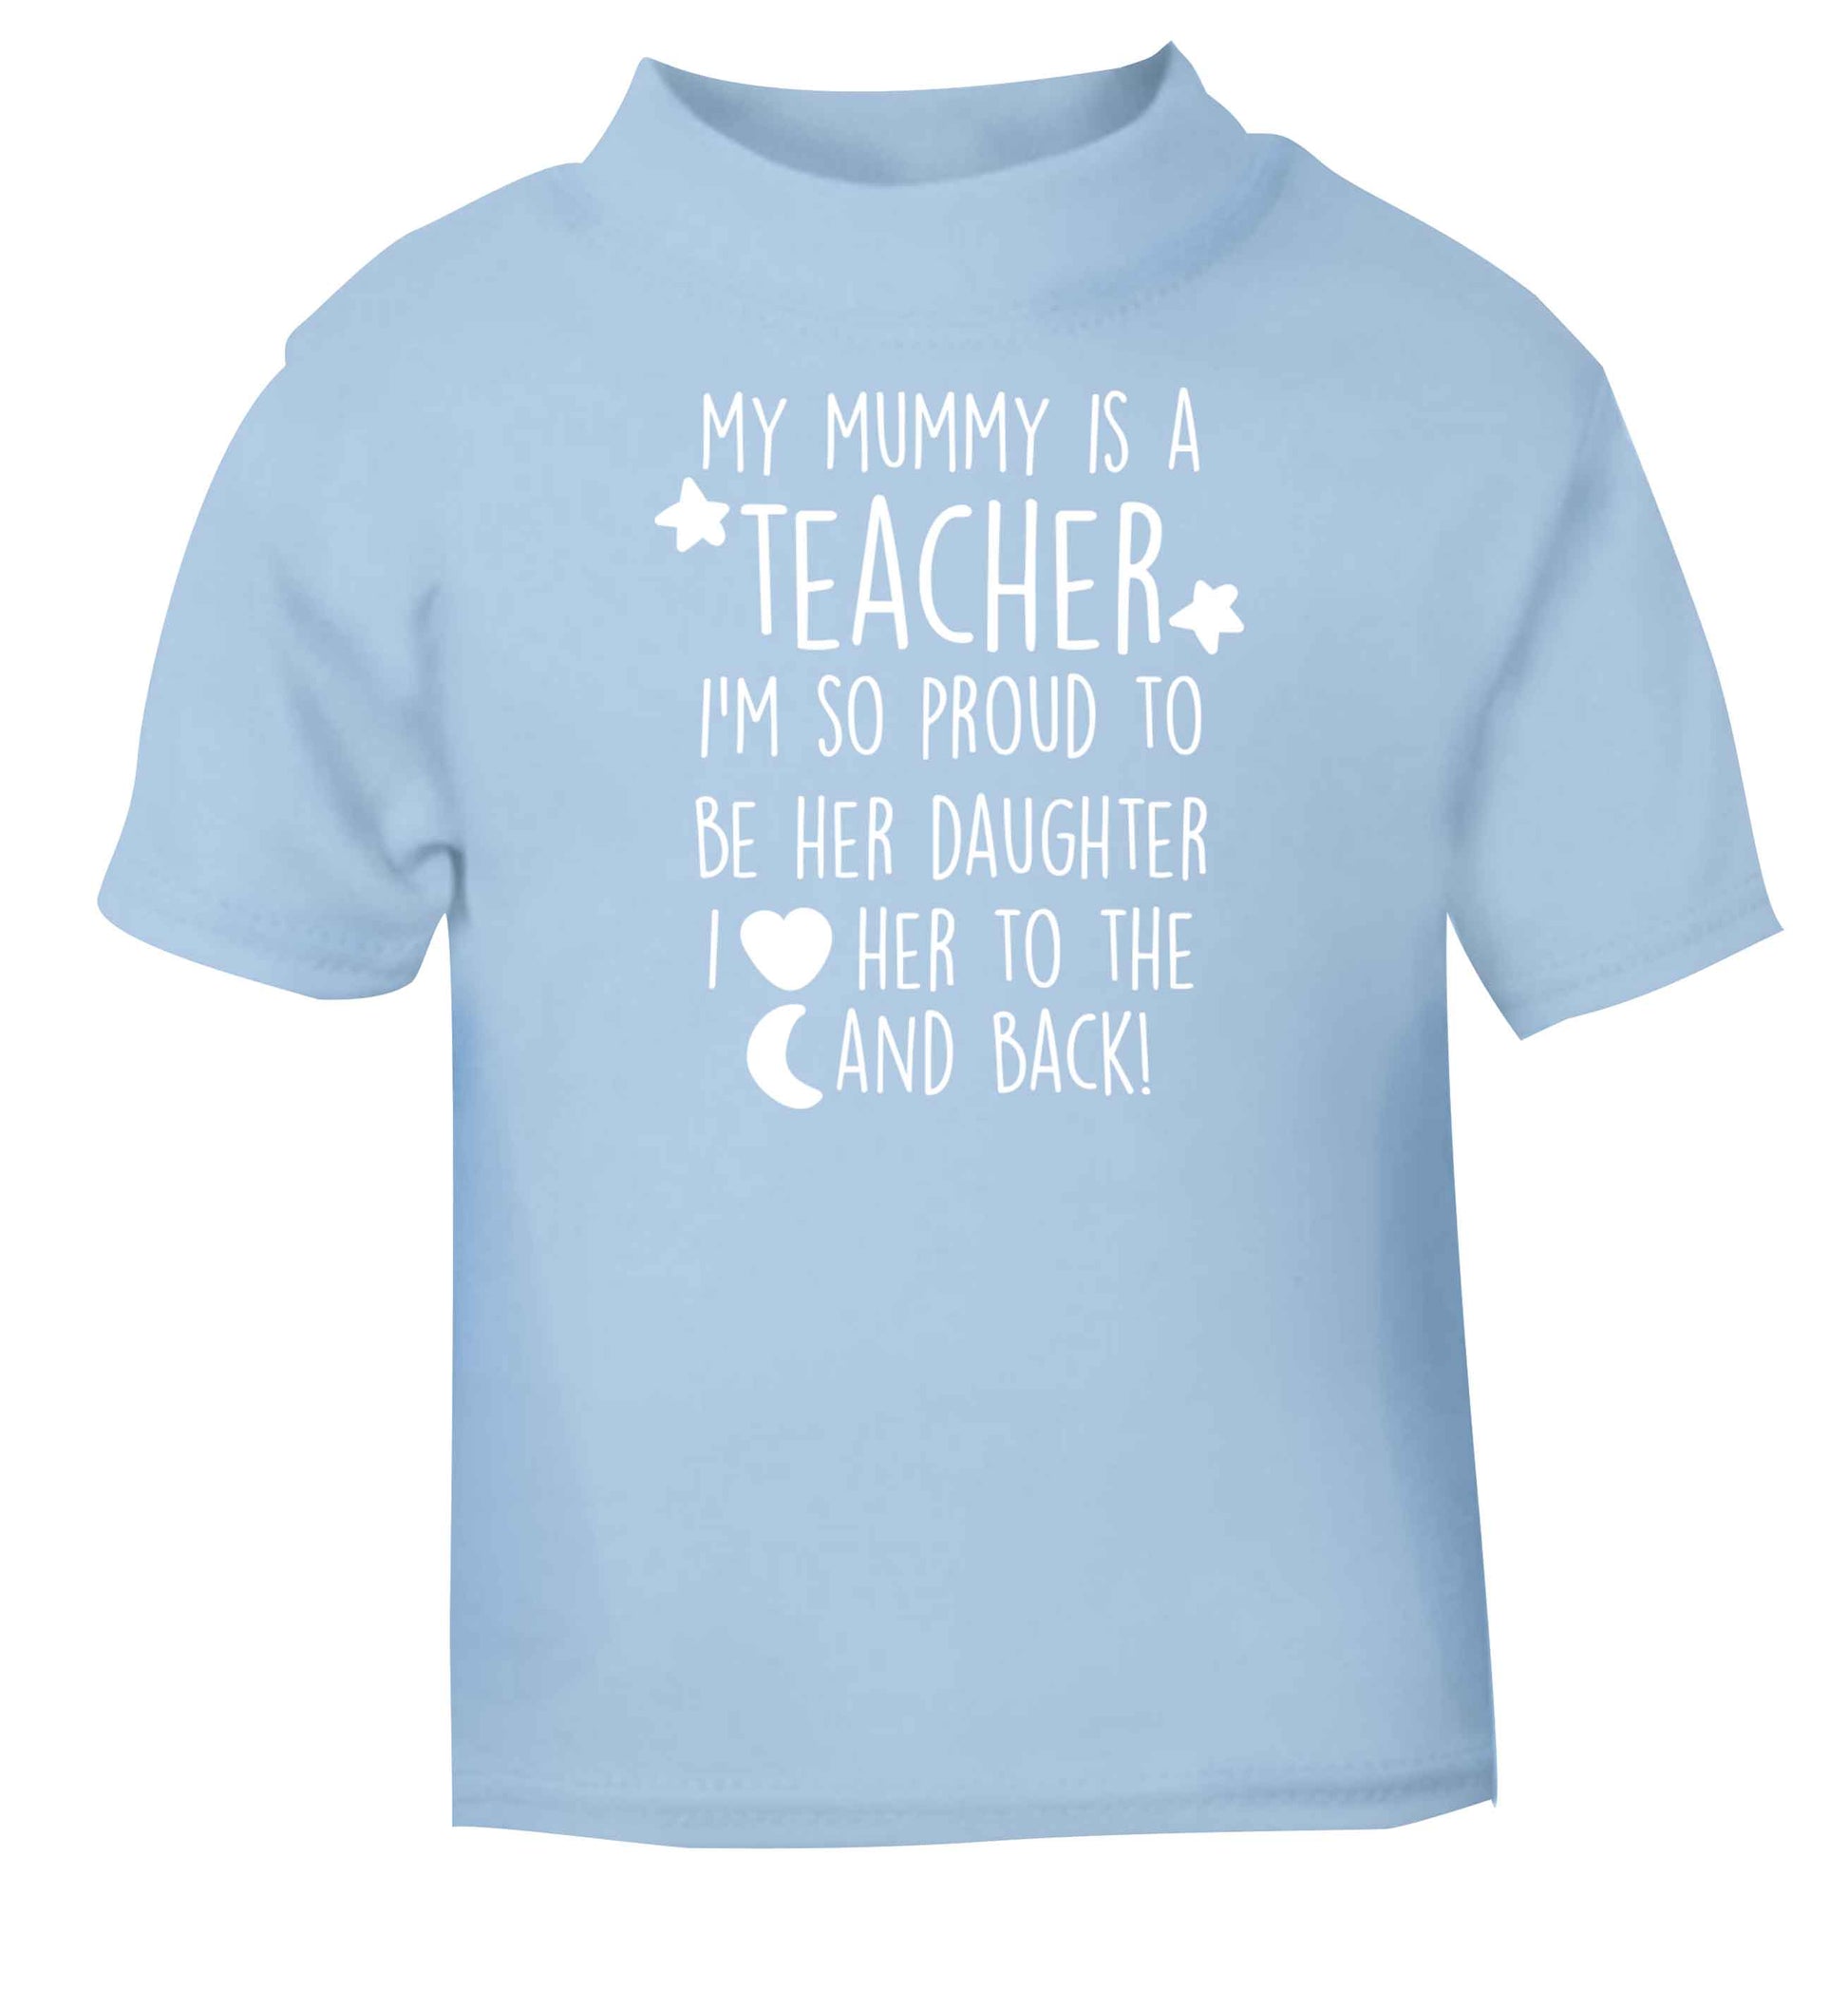 My mummy is a teacher I'm so proud to be her daughter I love her to the moon and back light blue baby toddler Tshirt 2 Years